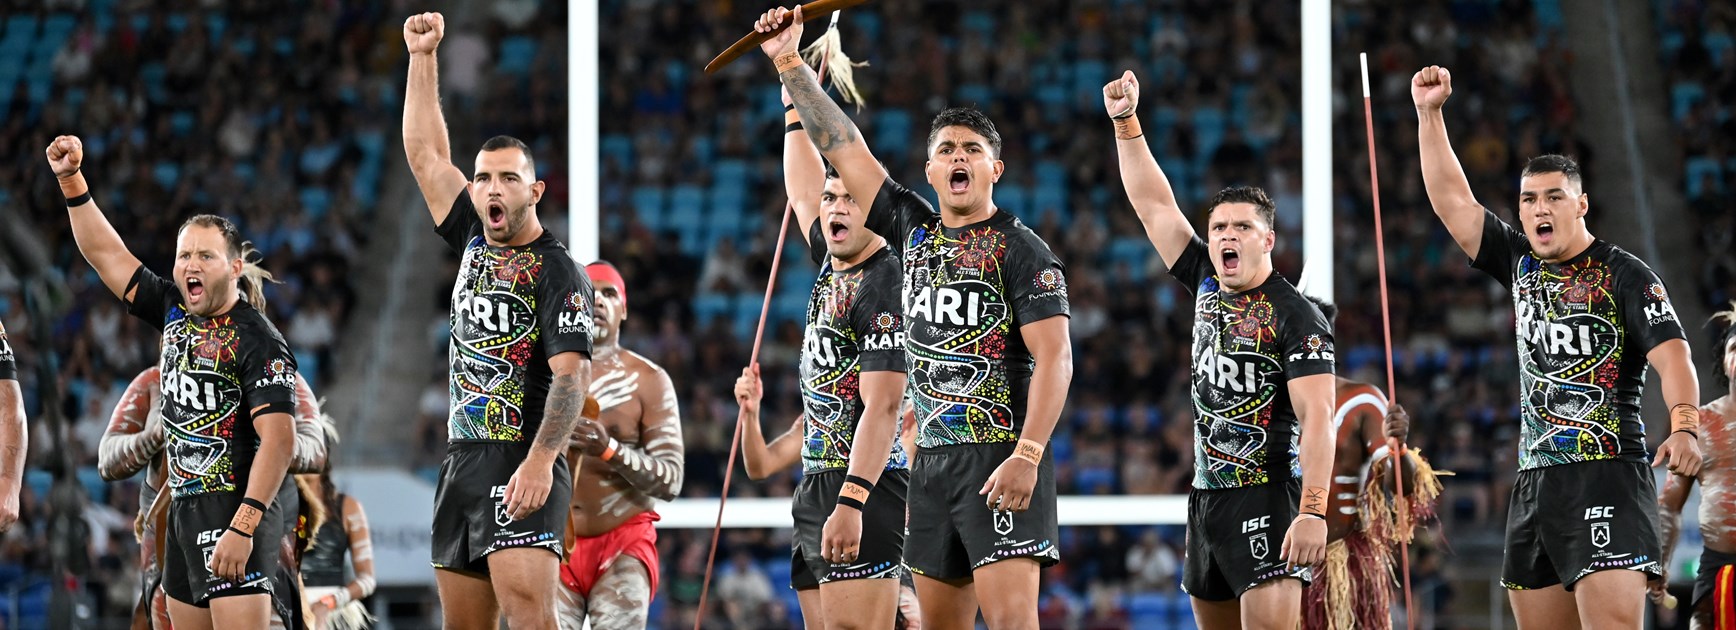 The NRL's year-round commitment to Indigenous programs